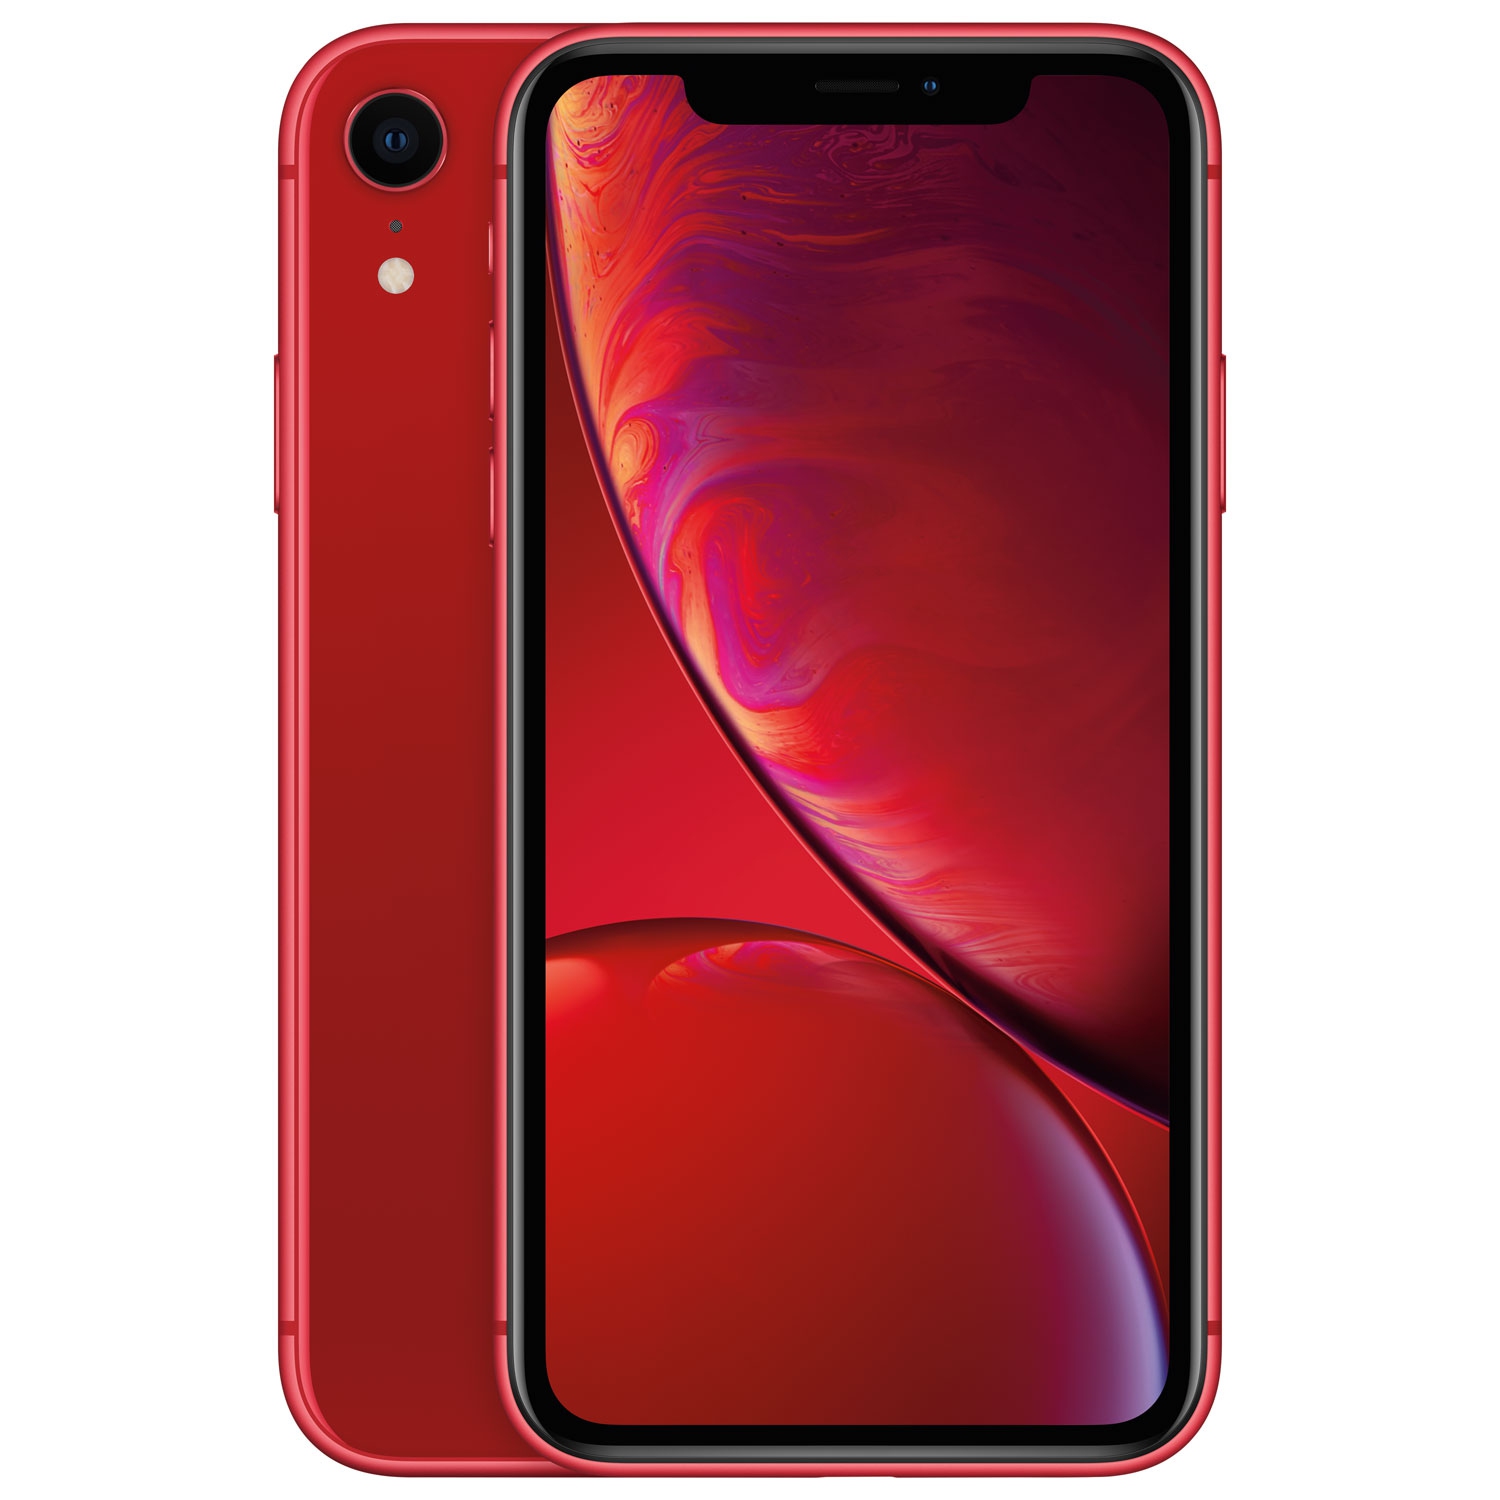 Refurbished (Excellent) - Apple iPhone XR 256GB Smartphone - (Product)RED - Unlocked - Certified Refurbished